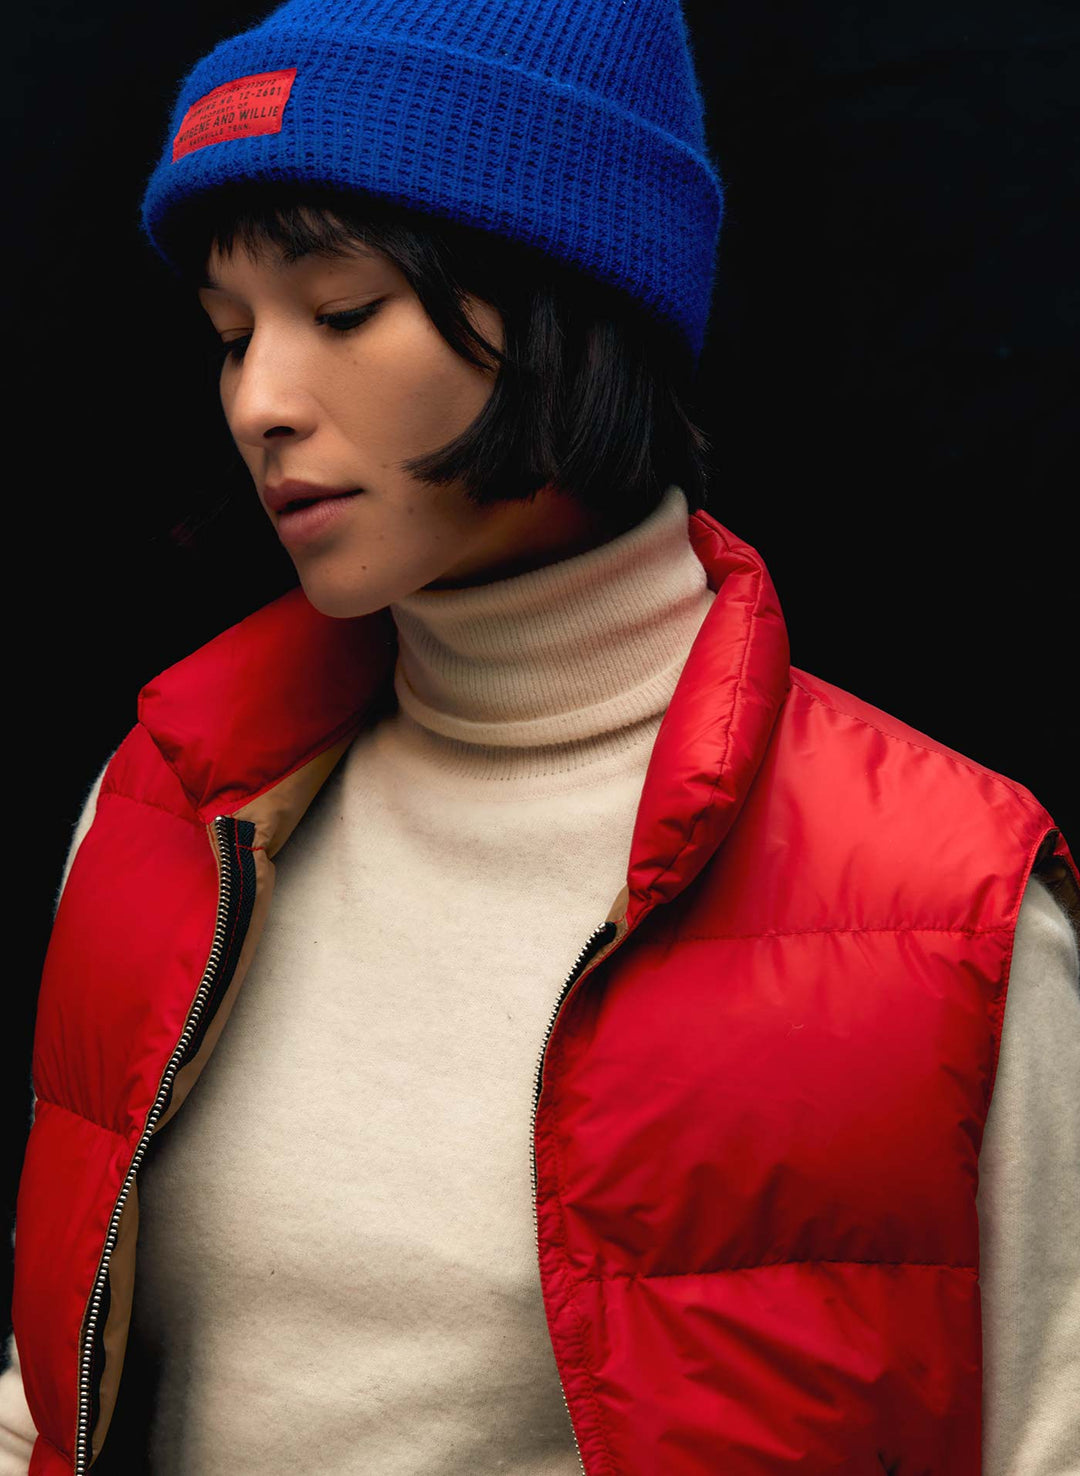 Lip, Outerwear, Neck, Textile, Flash photography, Sleeve, Cool, Red, Cap, Magenta